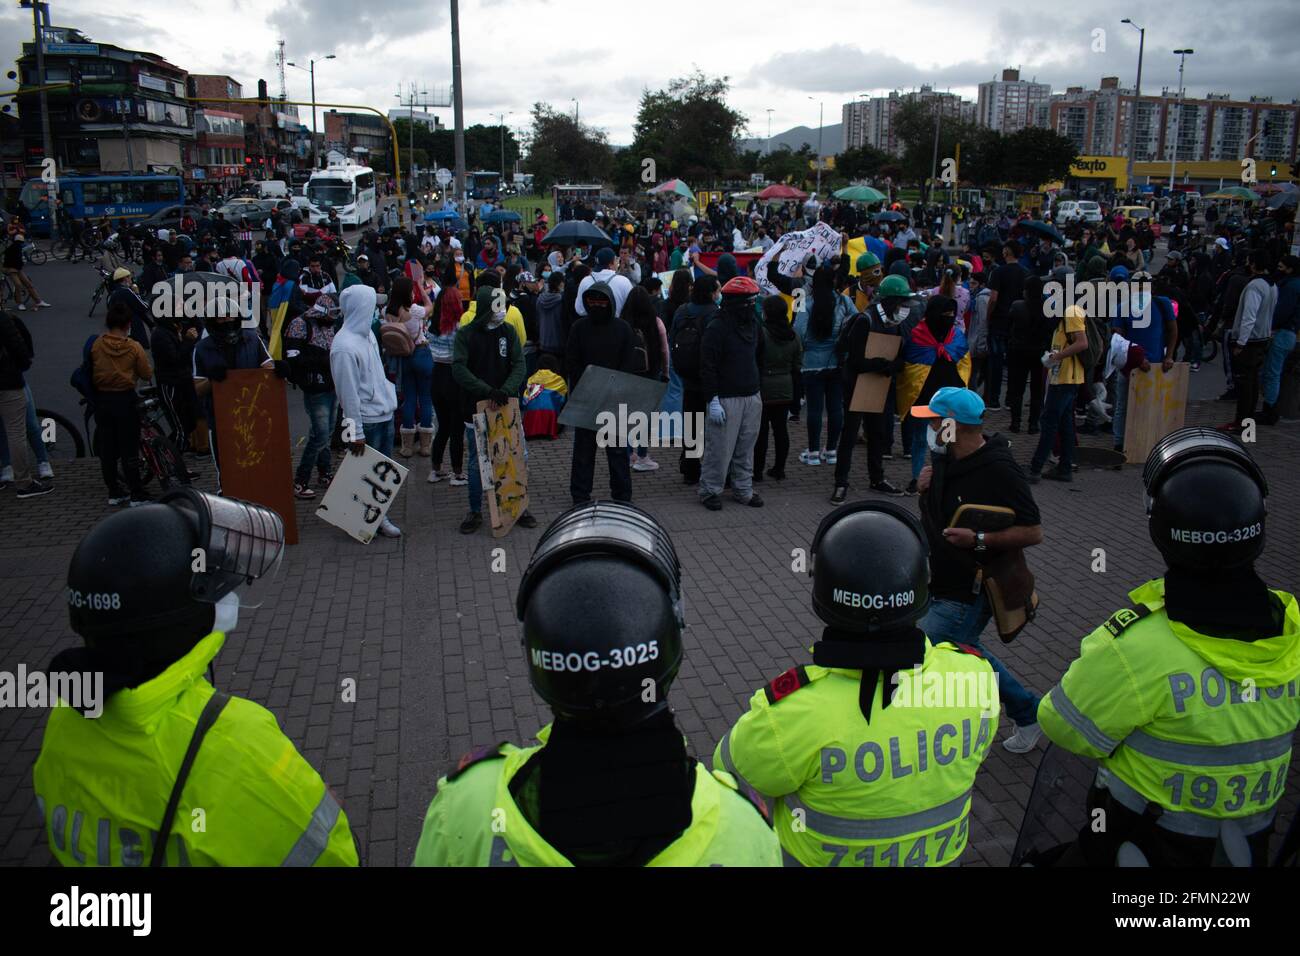 Bogota, Colombia, May 10, 2021, Bogota faces its 13 day of anti-government protests against the Health Reform and Police Brutality cases that rise to over 30 dead across the country since the National Strike begun. In Bogota, Colombia on May 10, 2021 Stock Photo